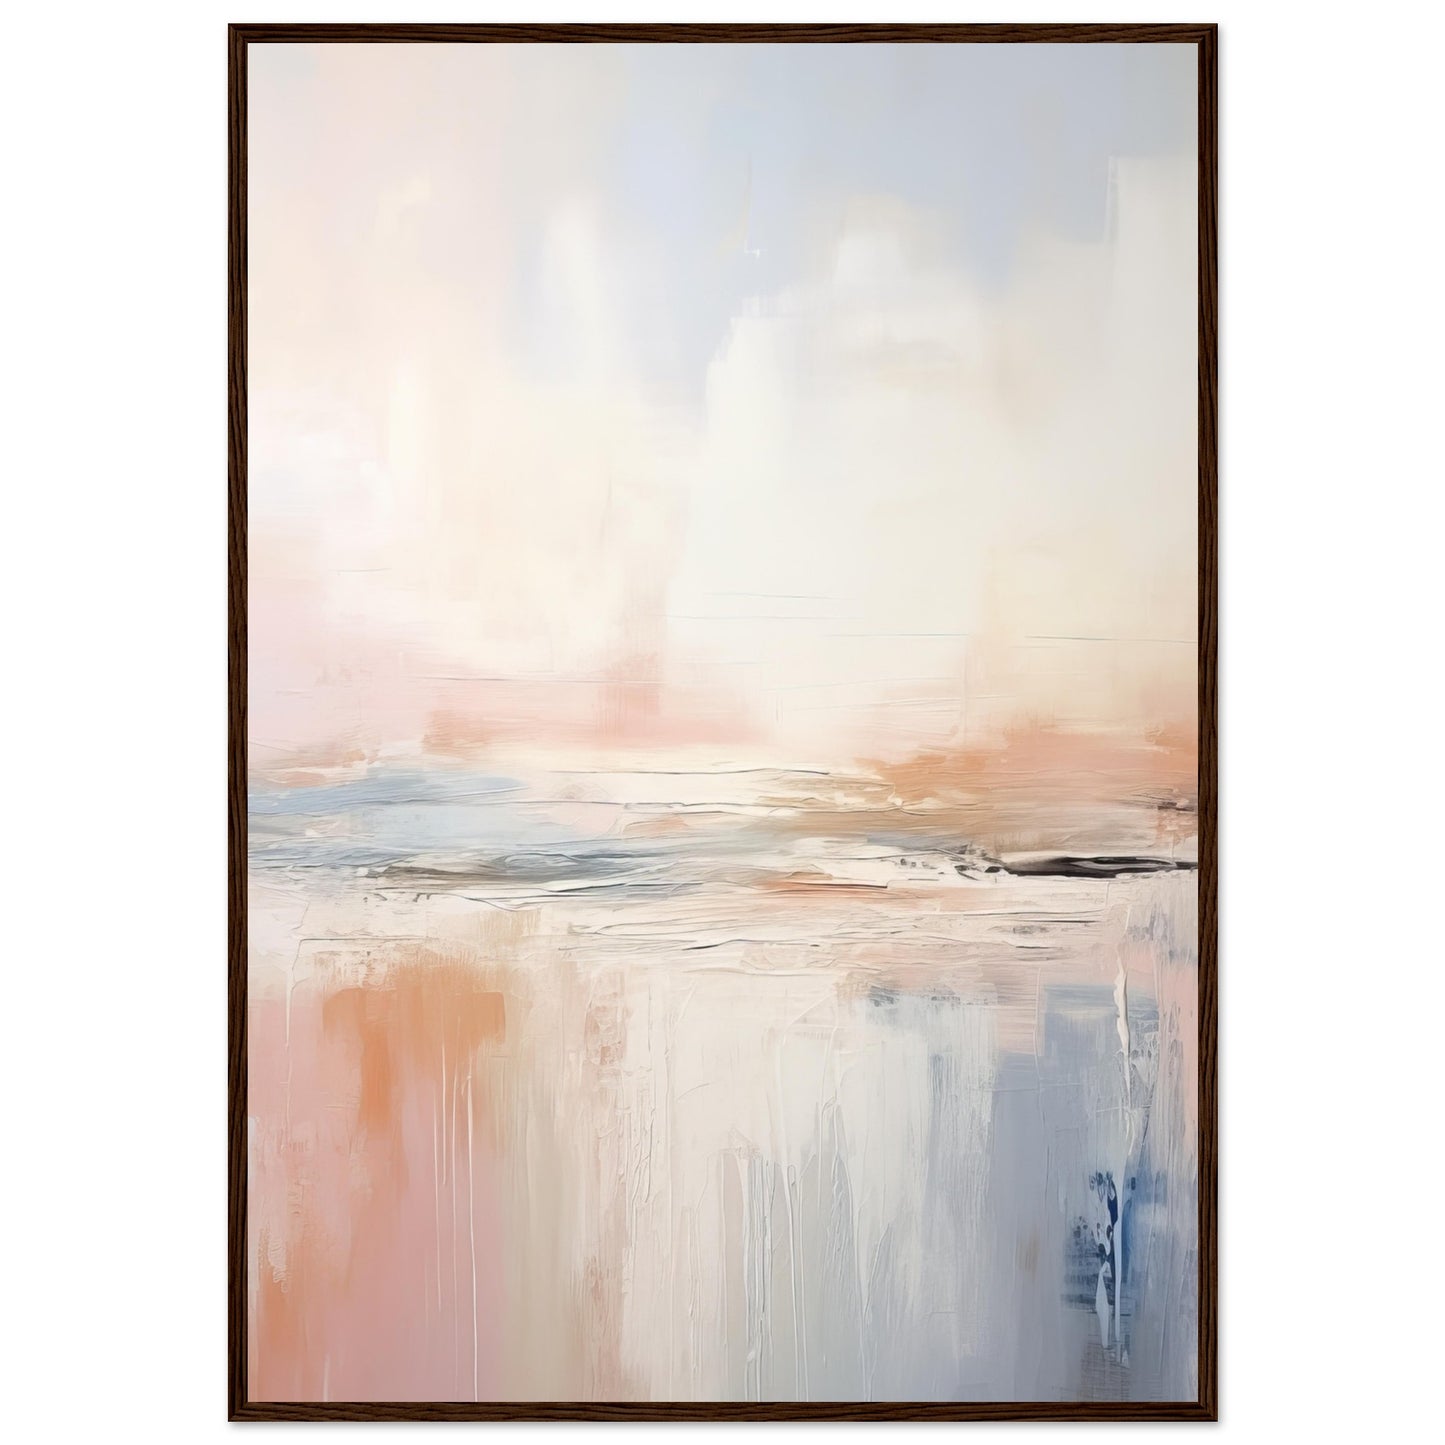 Those That I Can't See - Abstract Wall Art Print Pastel Hues of Pink, Blue, Cream